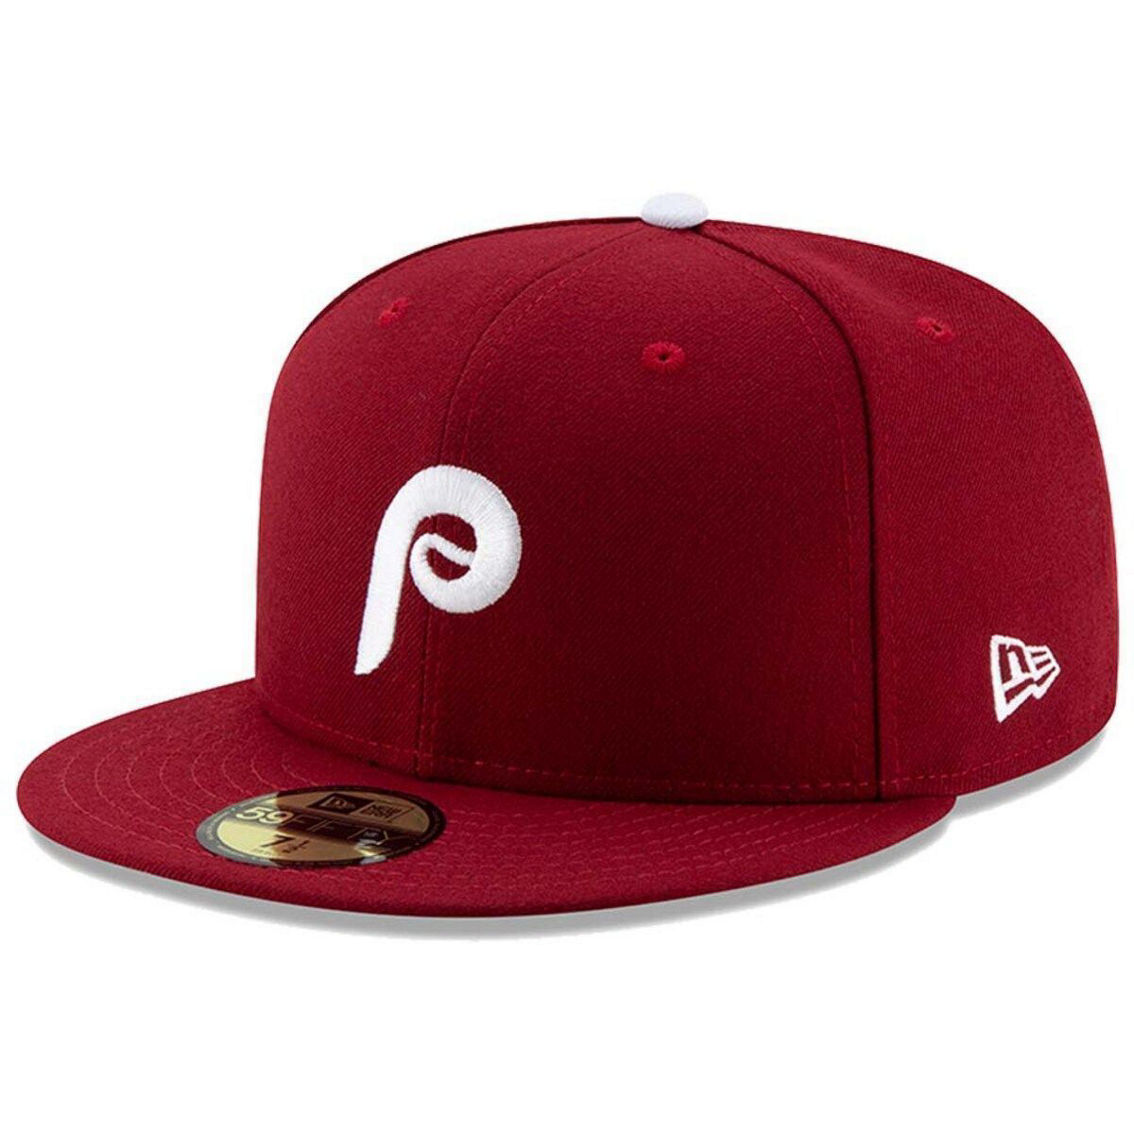 New Era Men's Maroon Philadelphia Phillies Alternate 2 Authentic Collection On-Field 59FIFTY Fitted Hat - Image 2 of 4